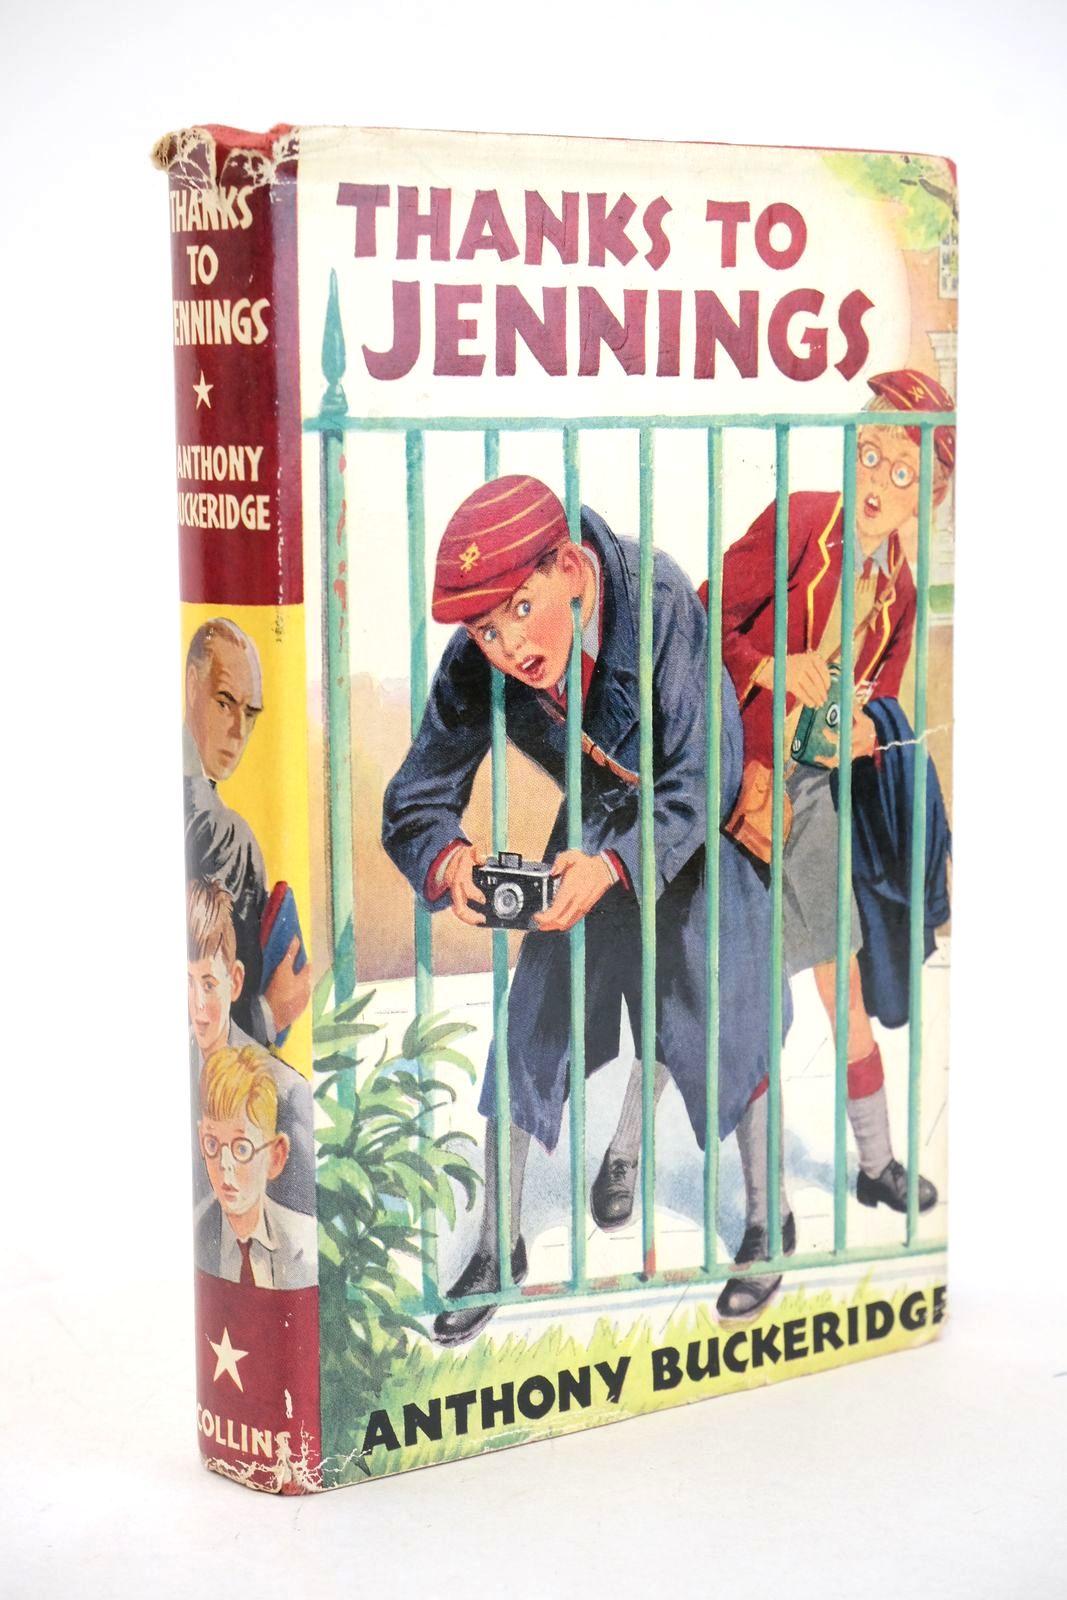 Photo of THANKS TO JENNINGS written by Buckeridge, Anthony illustrated by Mays, published by Collins (STOCK CODE: 1327517)  for sale by Stella & Rose's Books